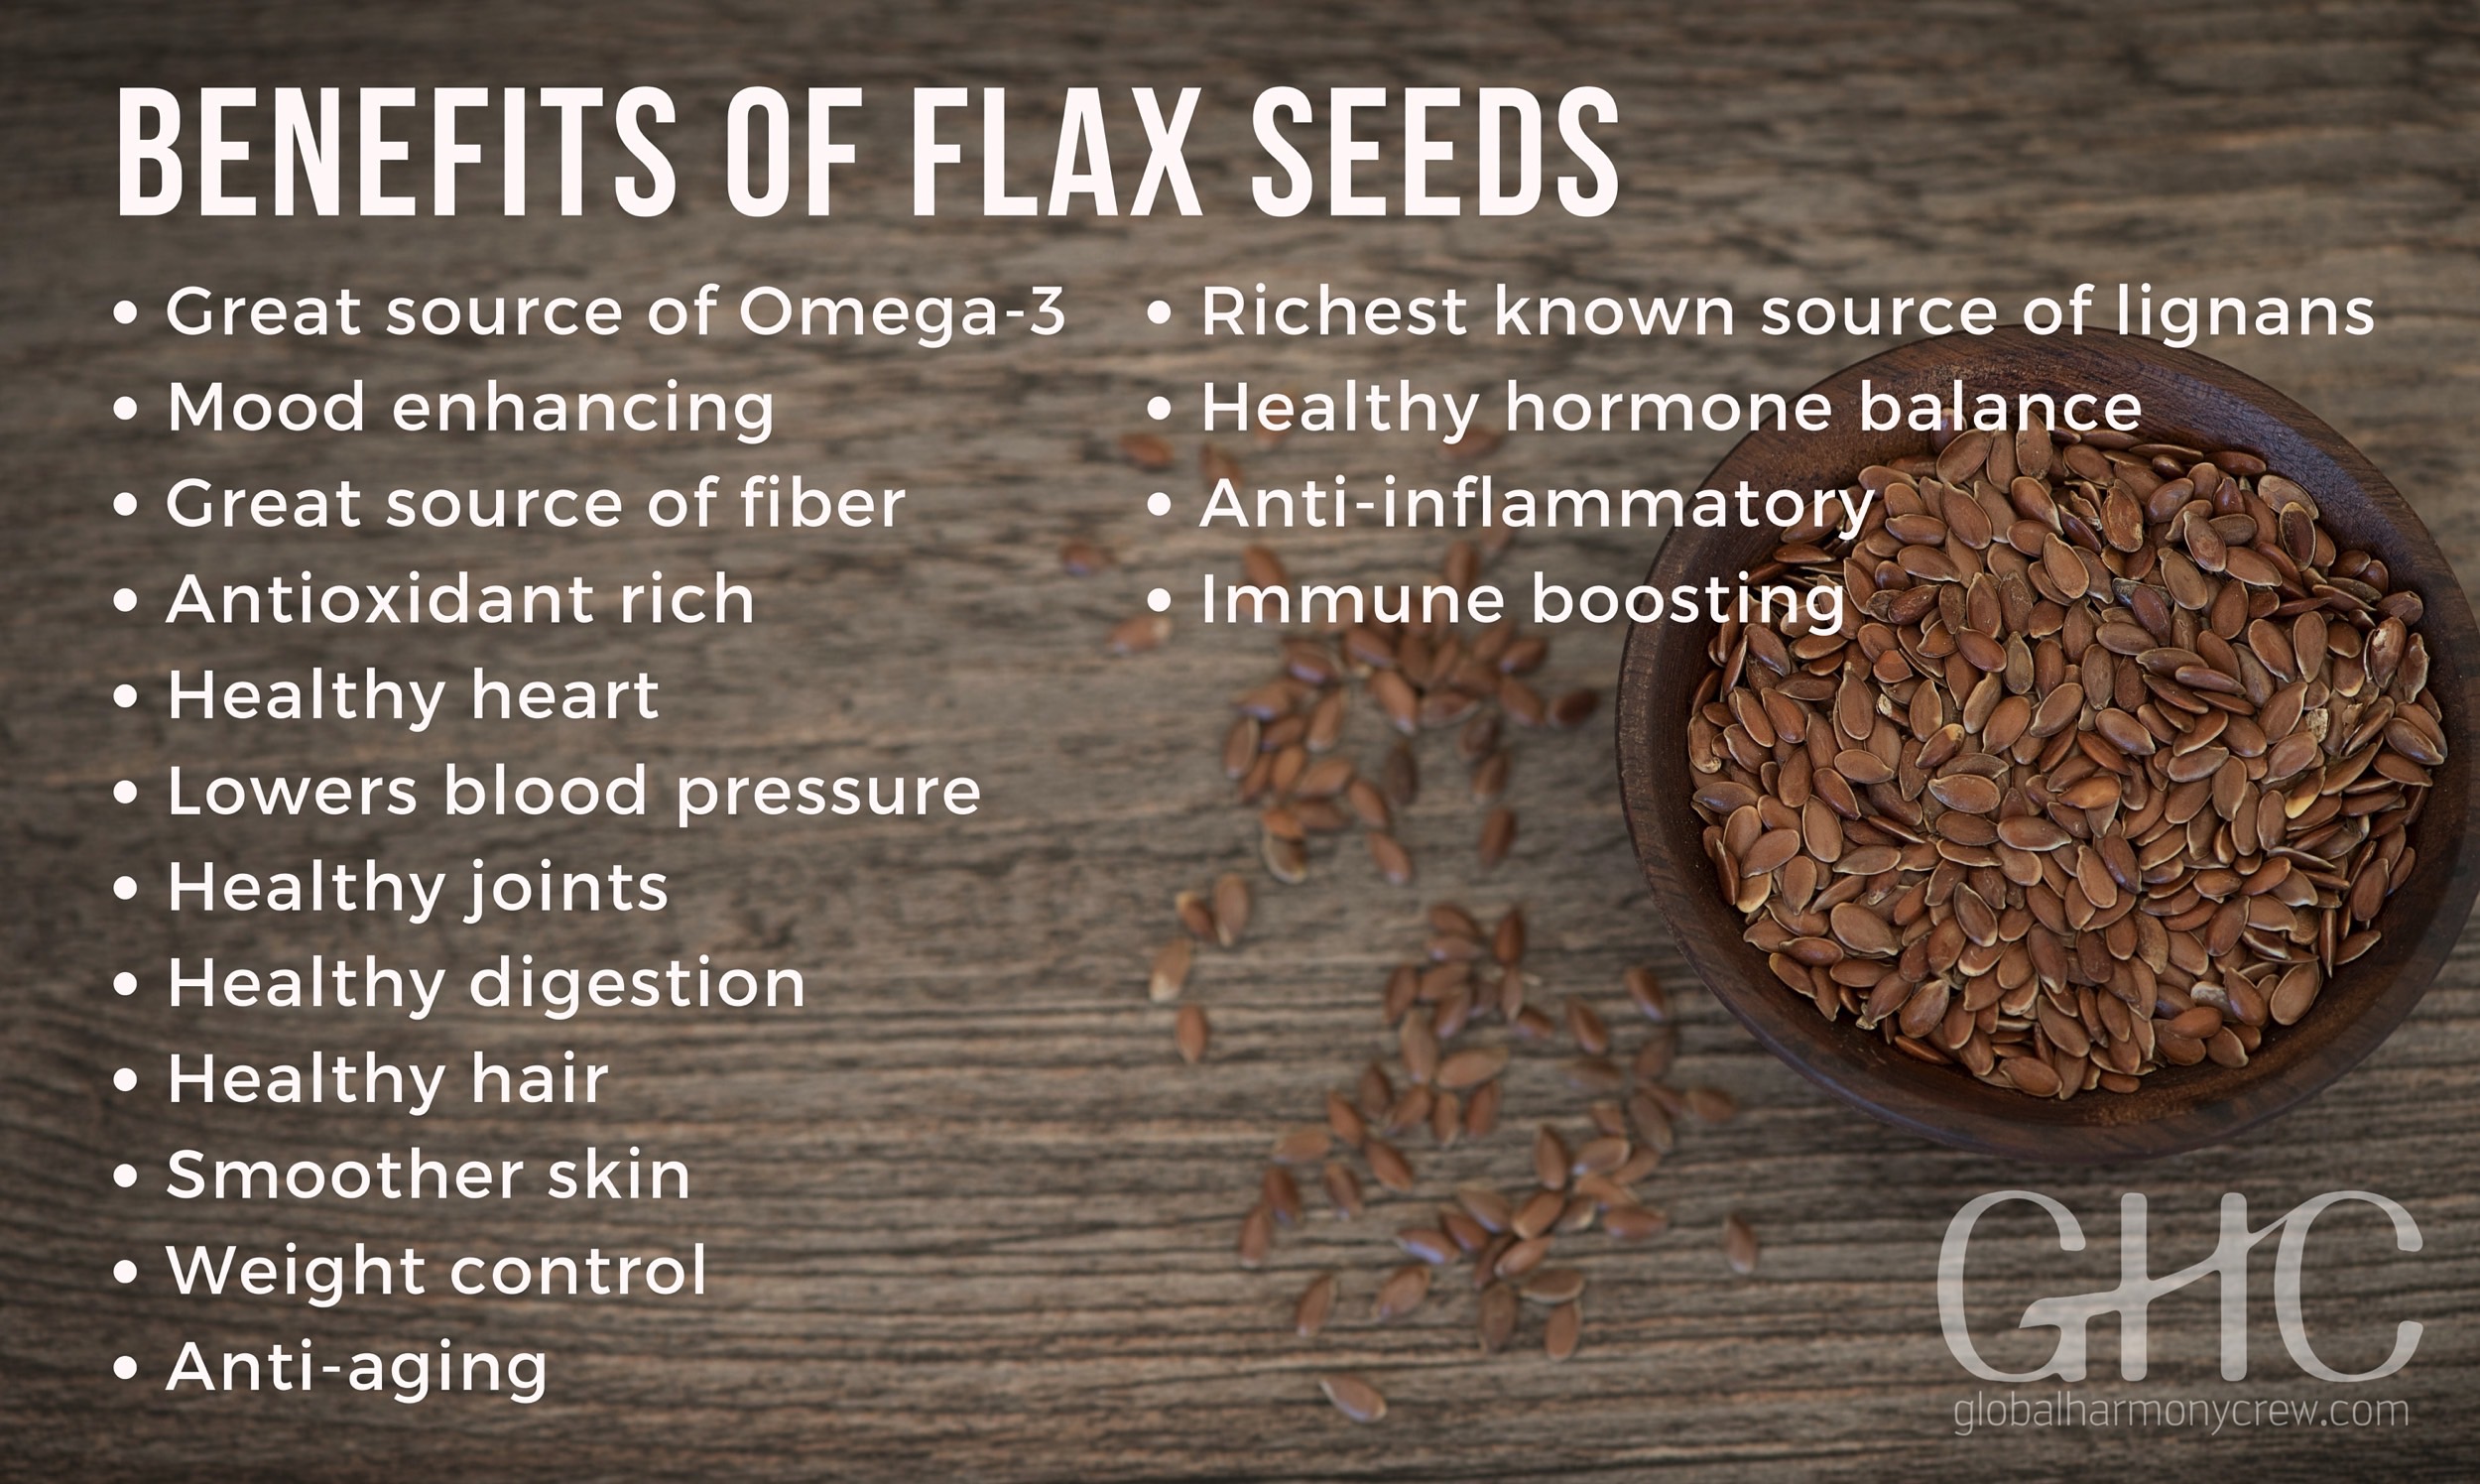 Benefits of flax seeds: Great source of Omega-3 Mood enhancing Great source of fiber Antioxidant rich Healthy heart Lowers blood pressure Healthy joints Healthy digestion Healthy hair Smoother skin Weight control Anti-aging Richest known source of lignans Healthy hormone balance Anti-inflammatory Immune boosting